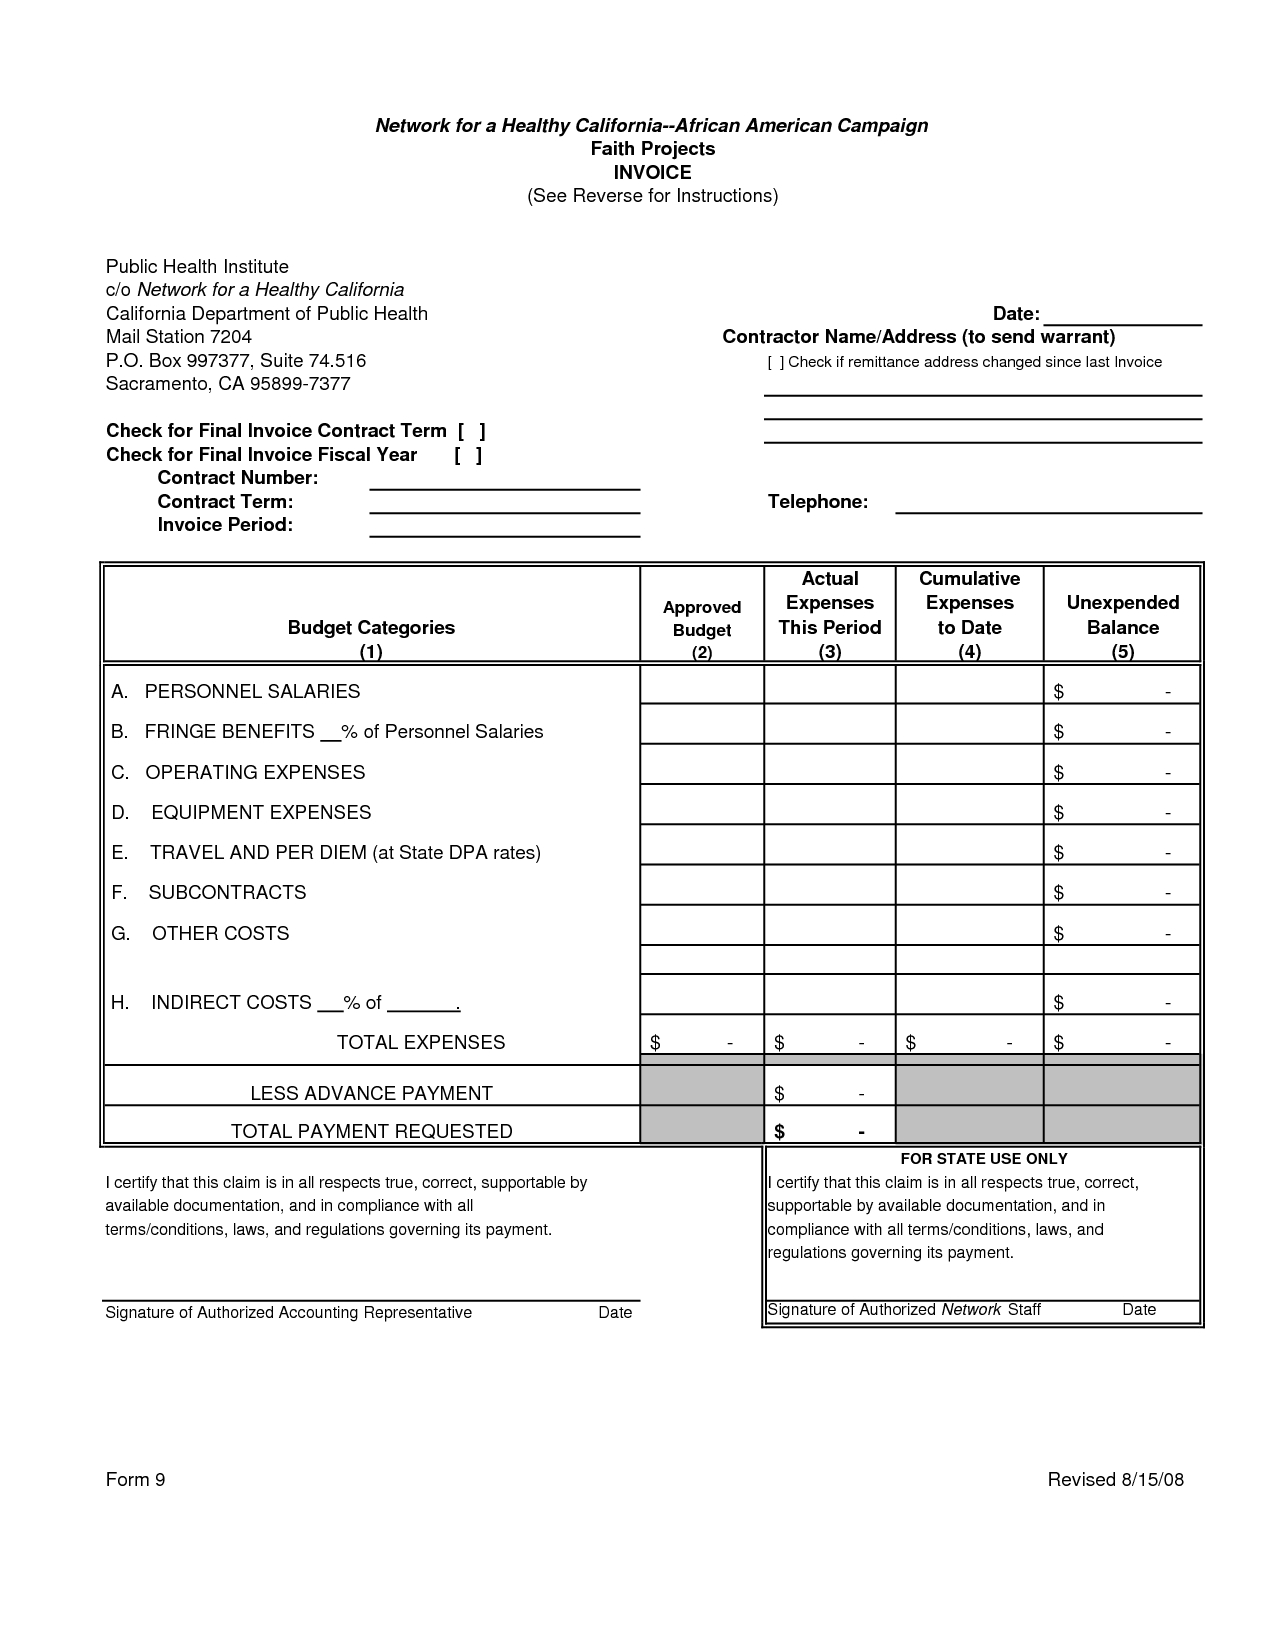 invoice terms and conditions sample invoice terms and conditions sample 1275 X 1650